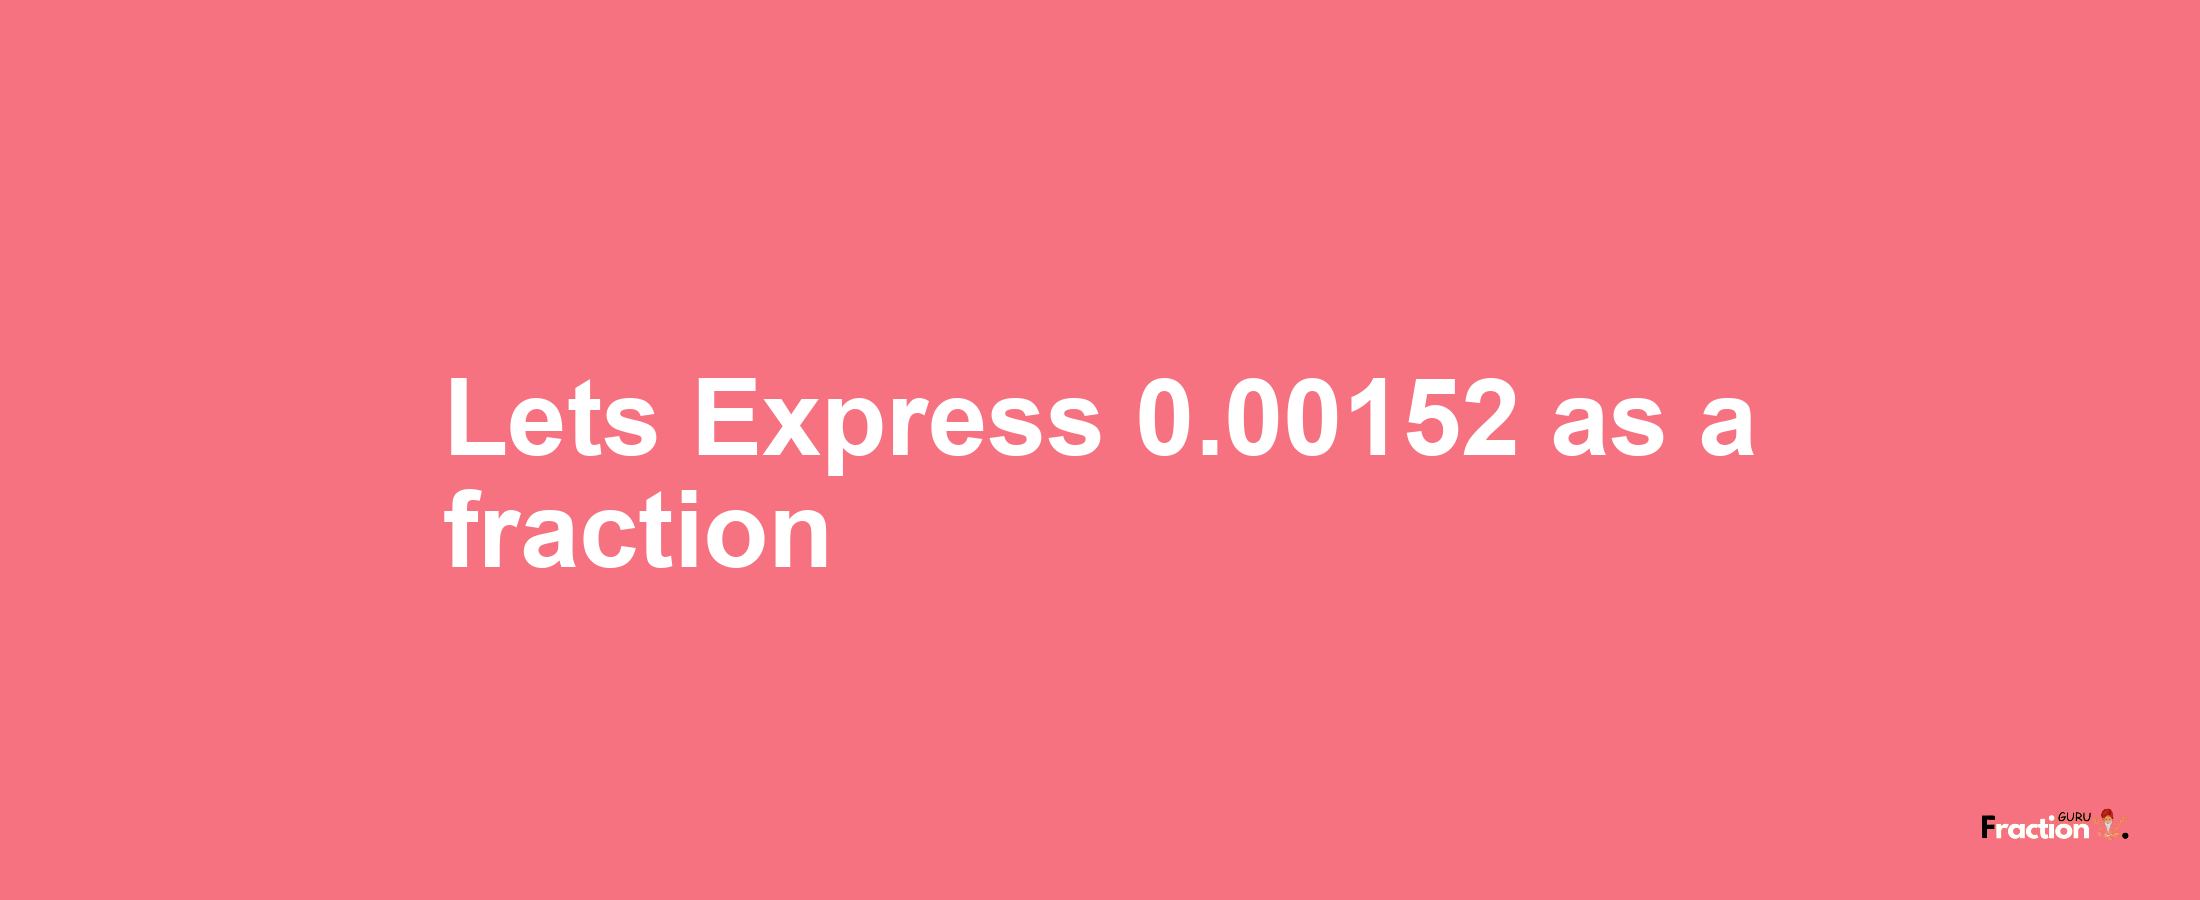 Lets Express 0.00152 as afraction